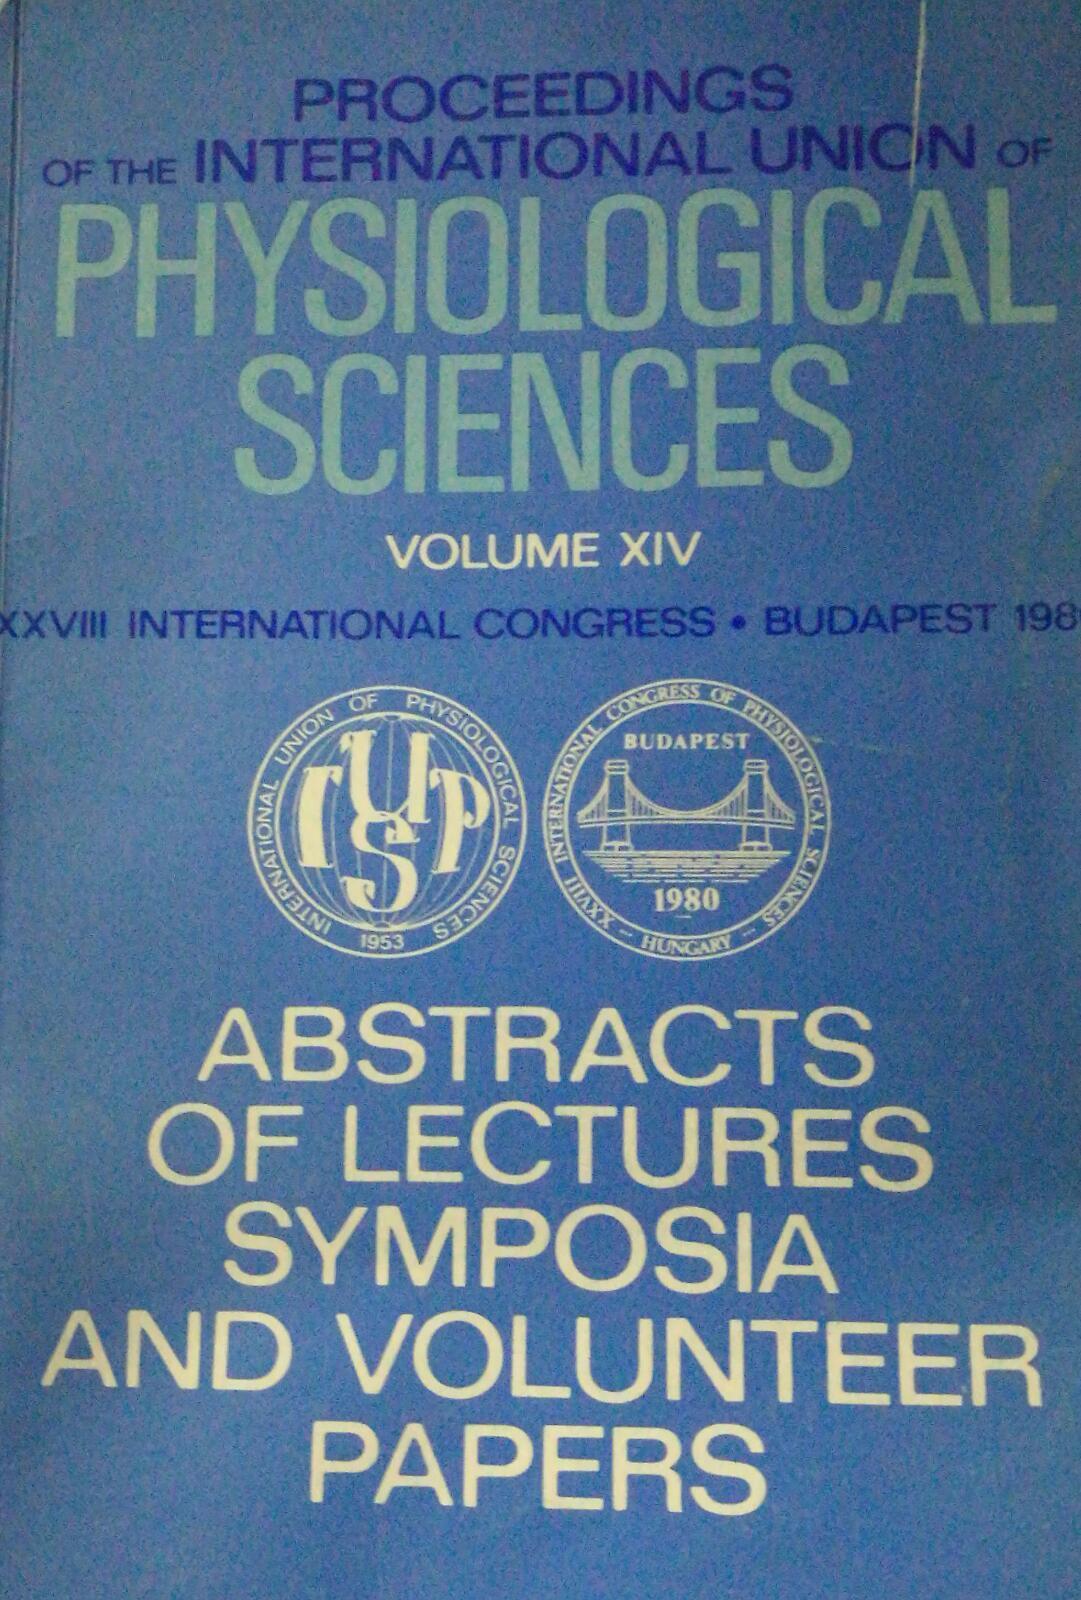 PROCEEDINGS OF THE INTERNATIONAL UNION OF PHYSIOLOGICAL SCIENCE - Aa. Vv. - 1980